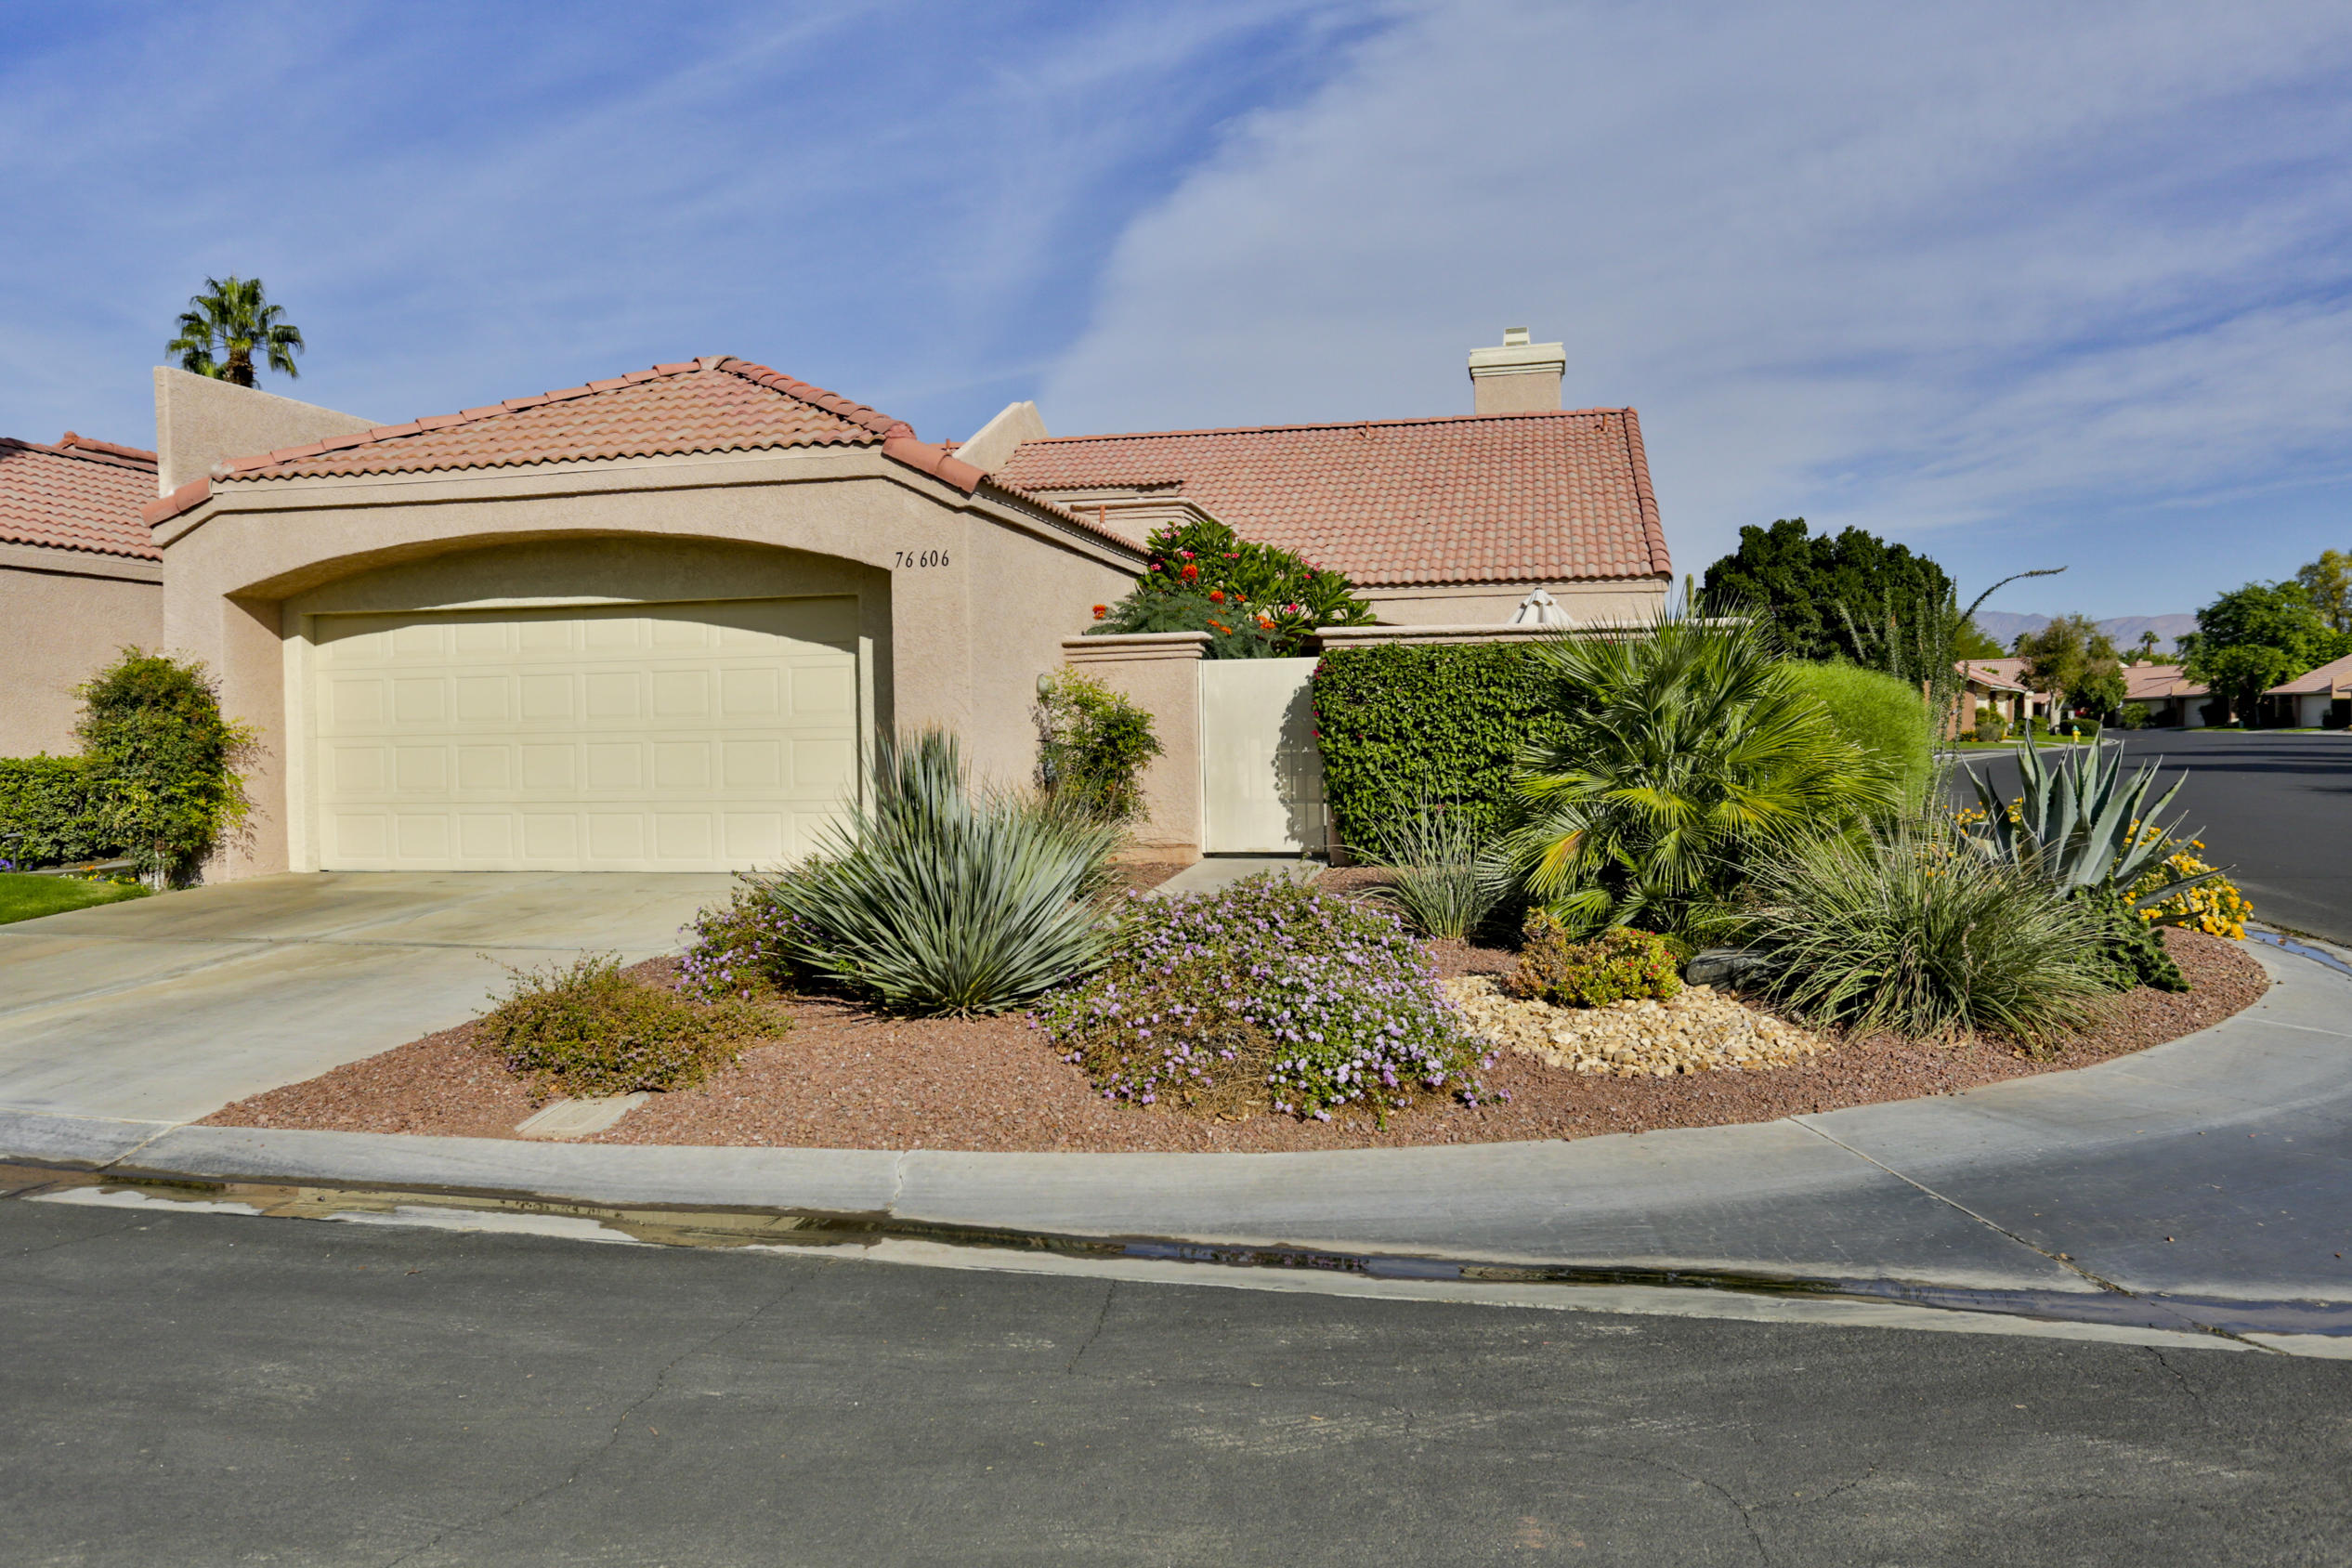 Image Number 1 for 76606 Sheba Way in Palm Desert